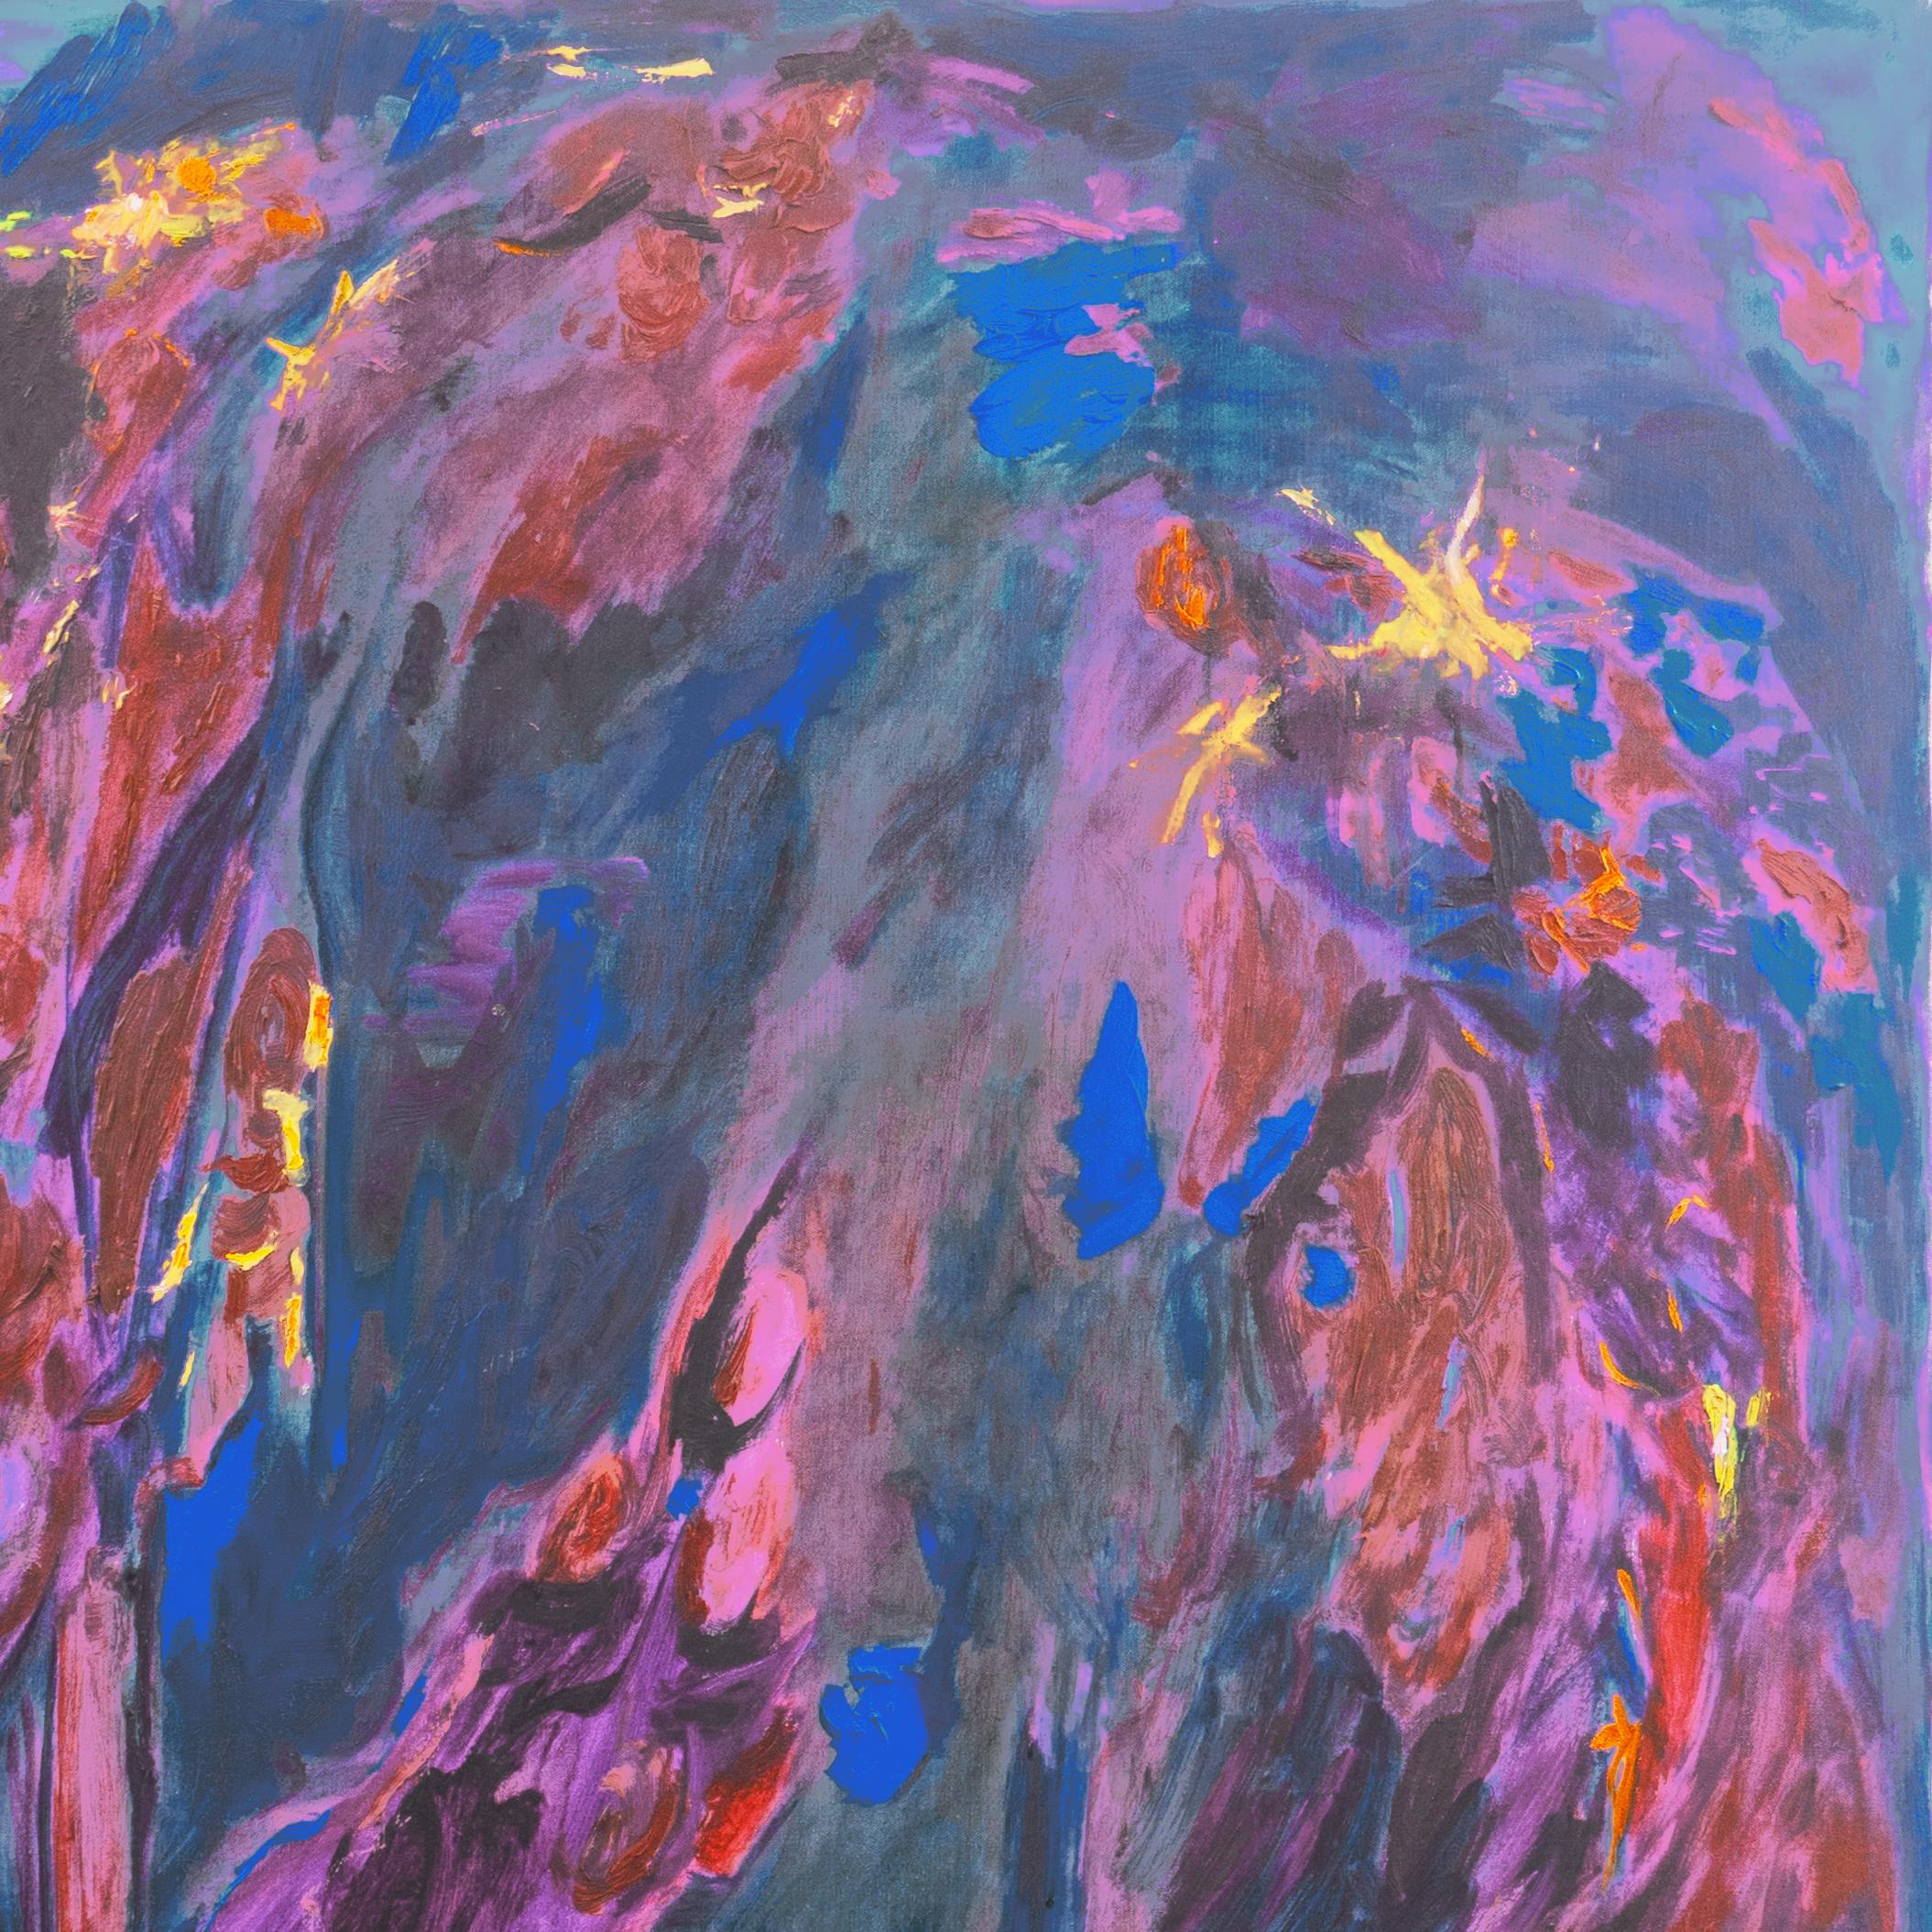 'Abstract, Indigo and Violet', Large 1970's American Action Abstract Oil - Abstract Expressionist Painting by H. Blouin